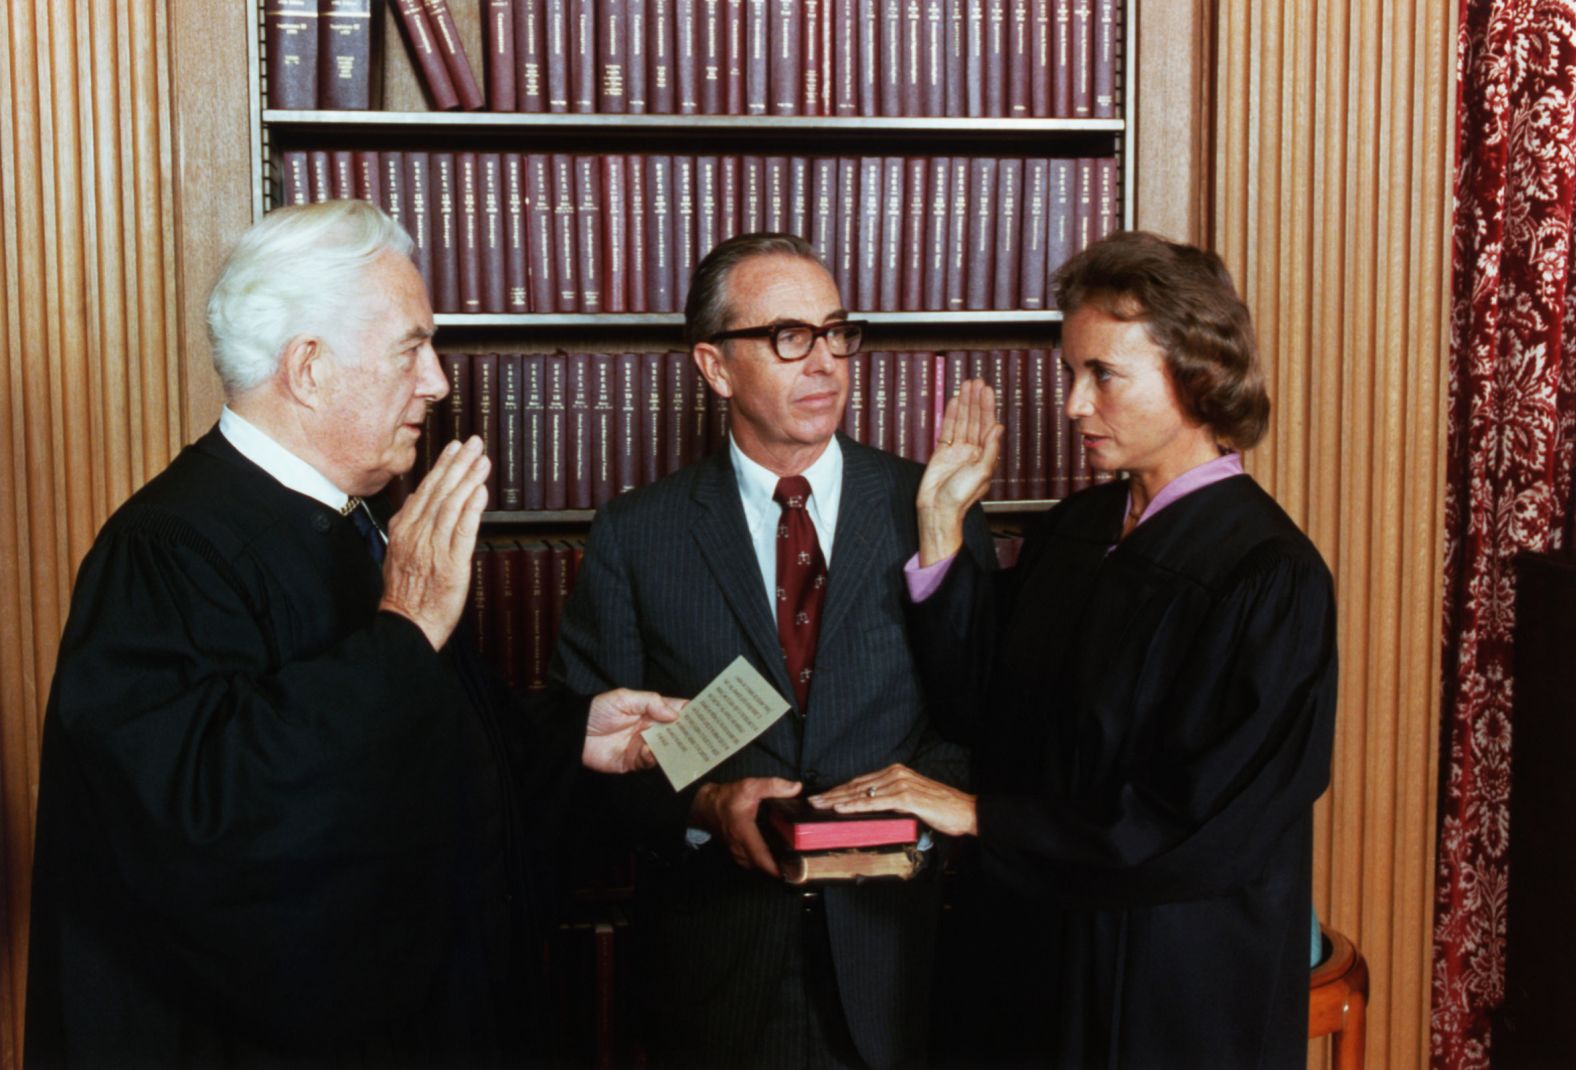 O'Connor is sworn in by Supreme Court Chief Justice Warren Burger in 1981. Her husband, John, is holding two family Bibles.